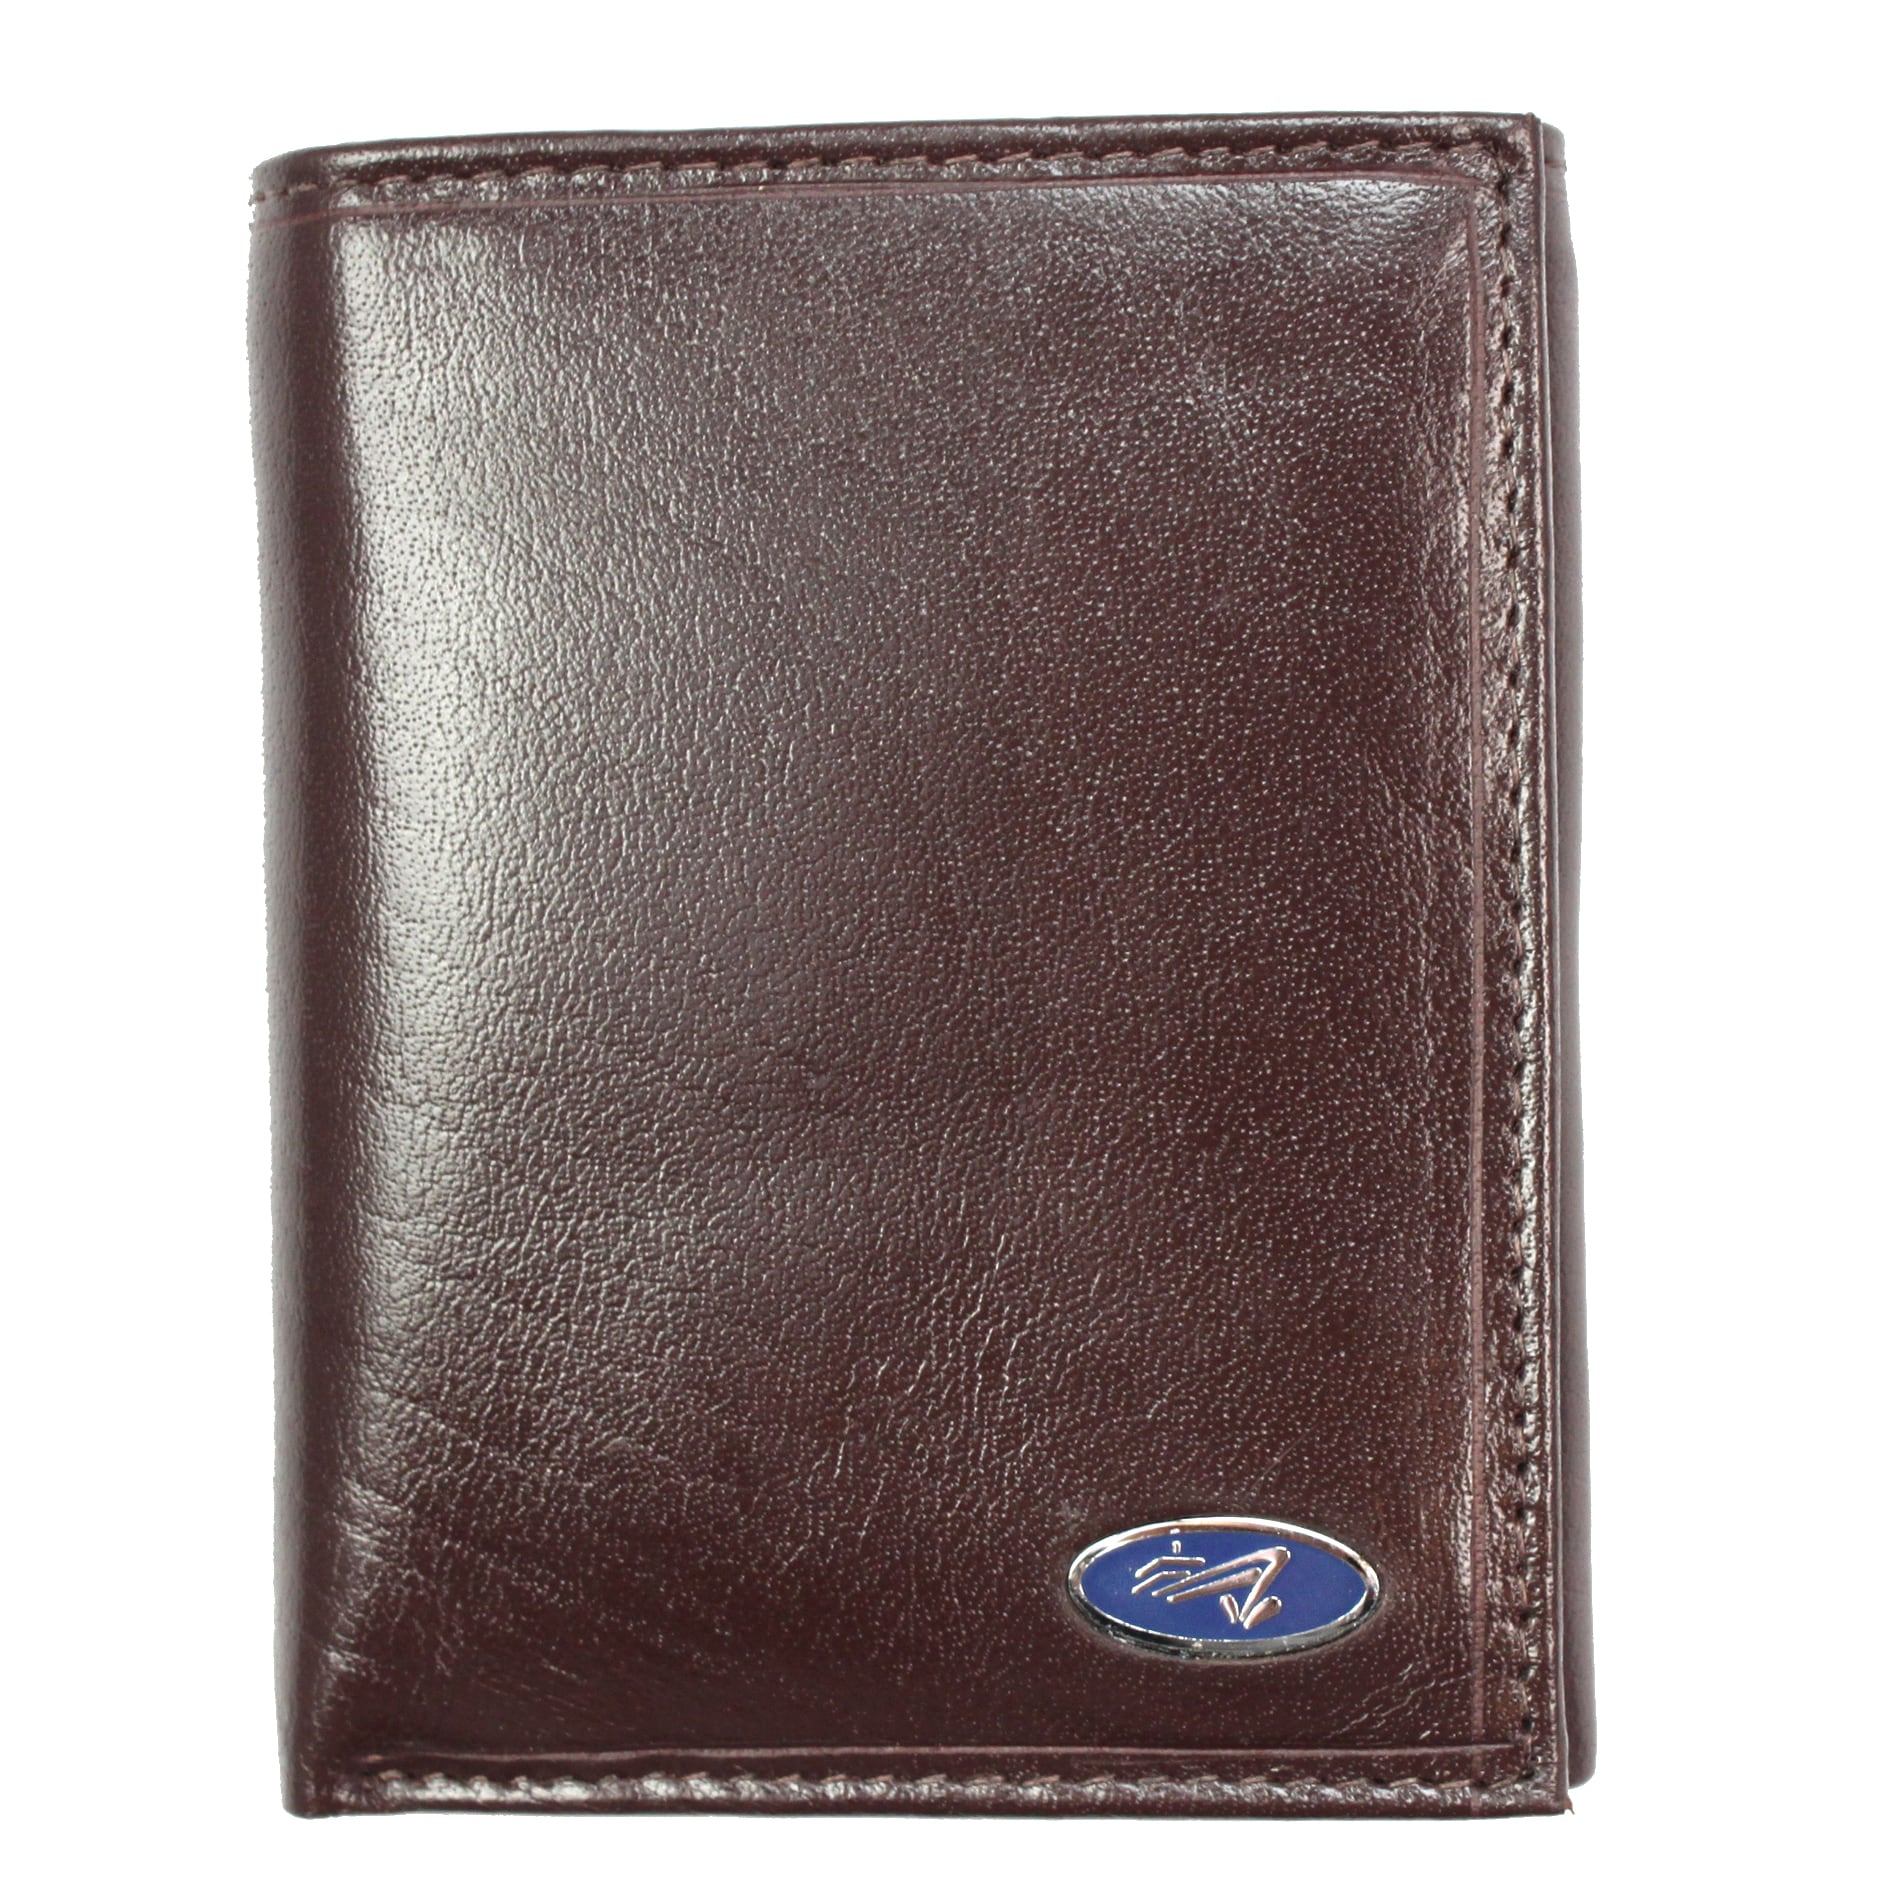 Men's Trifold Wallets For Sale | IUCN Water